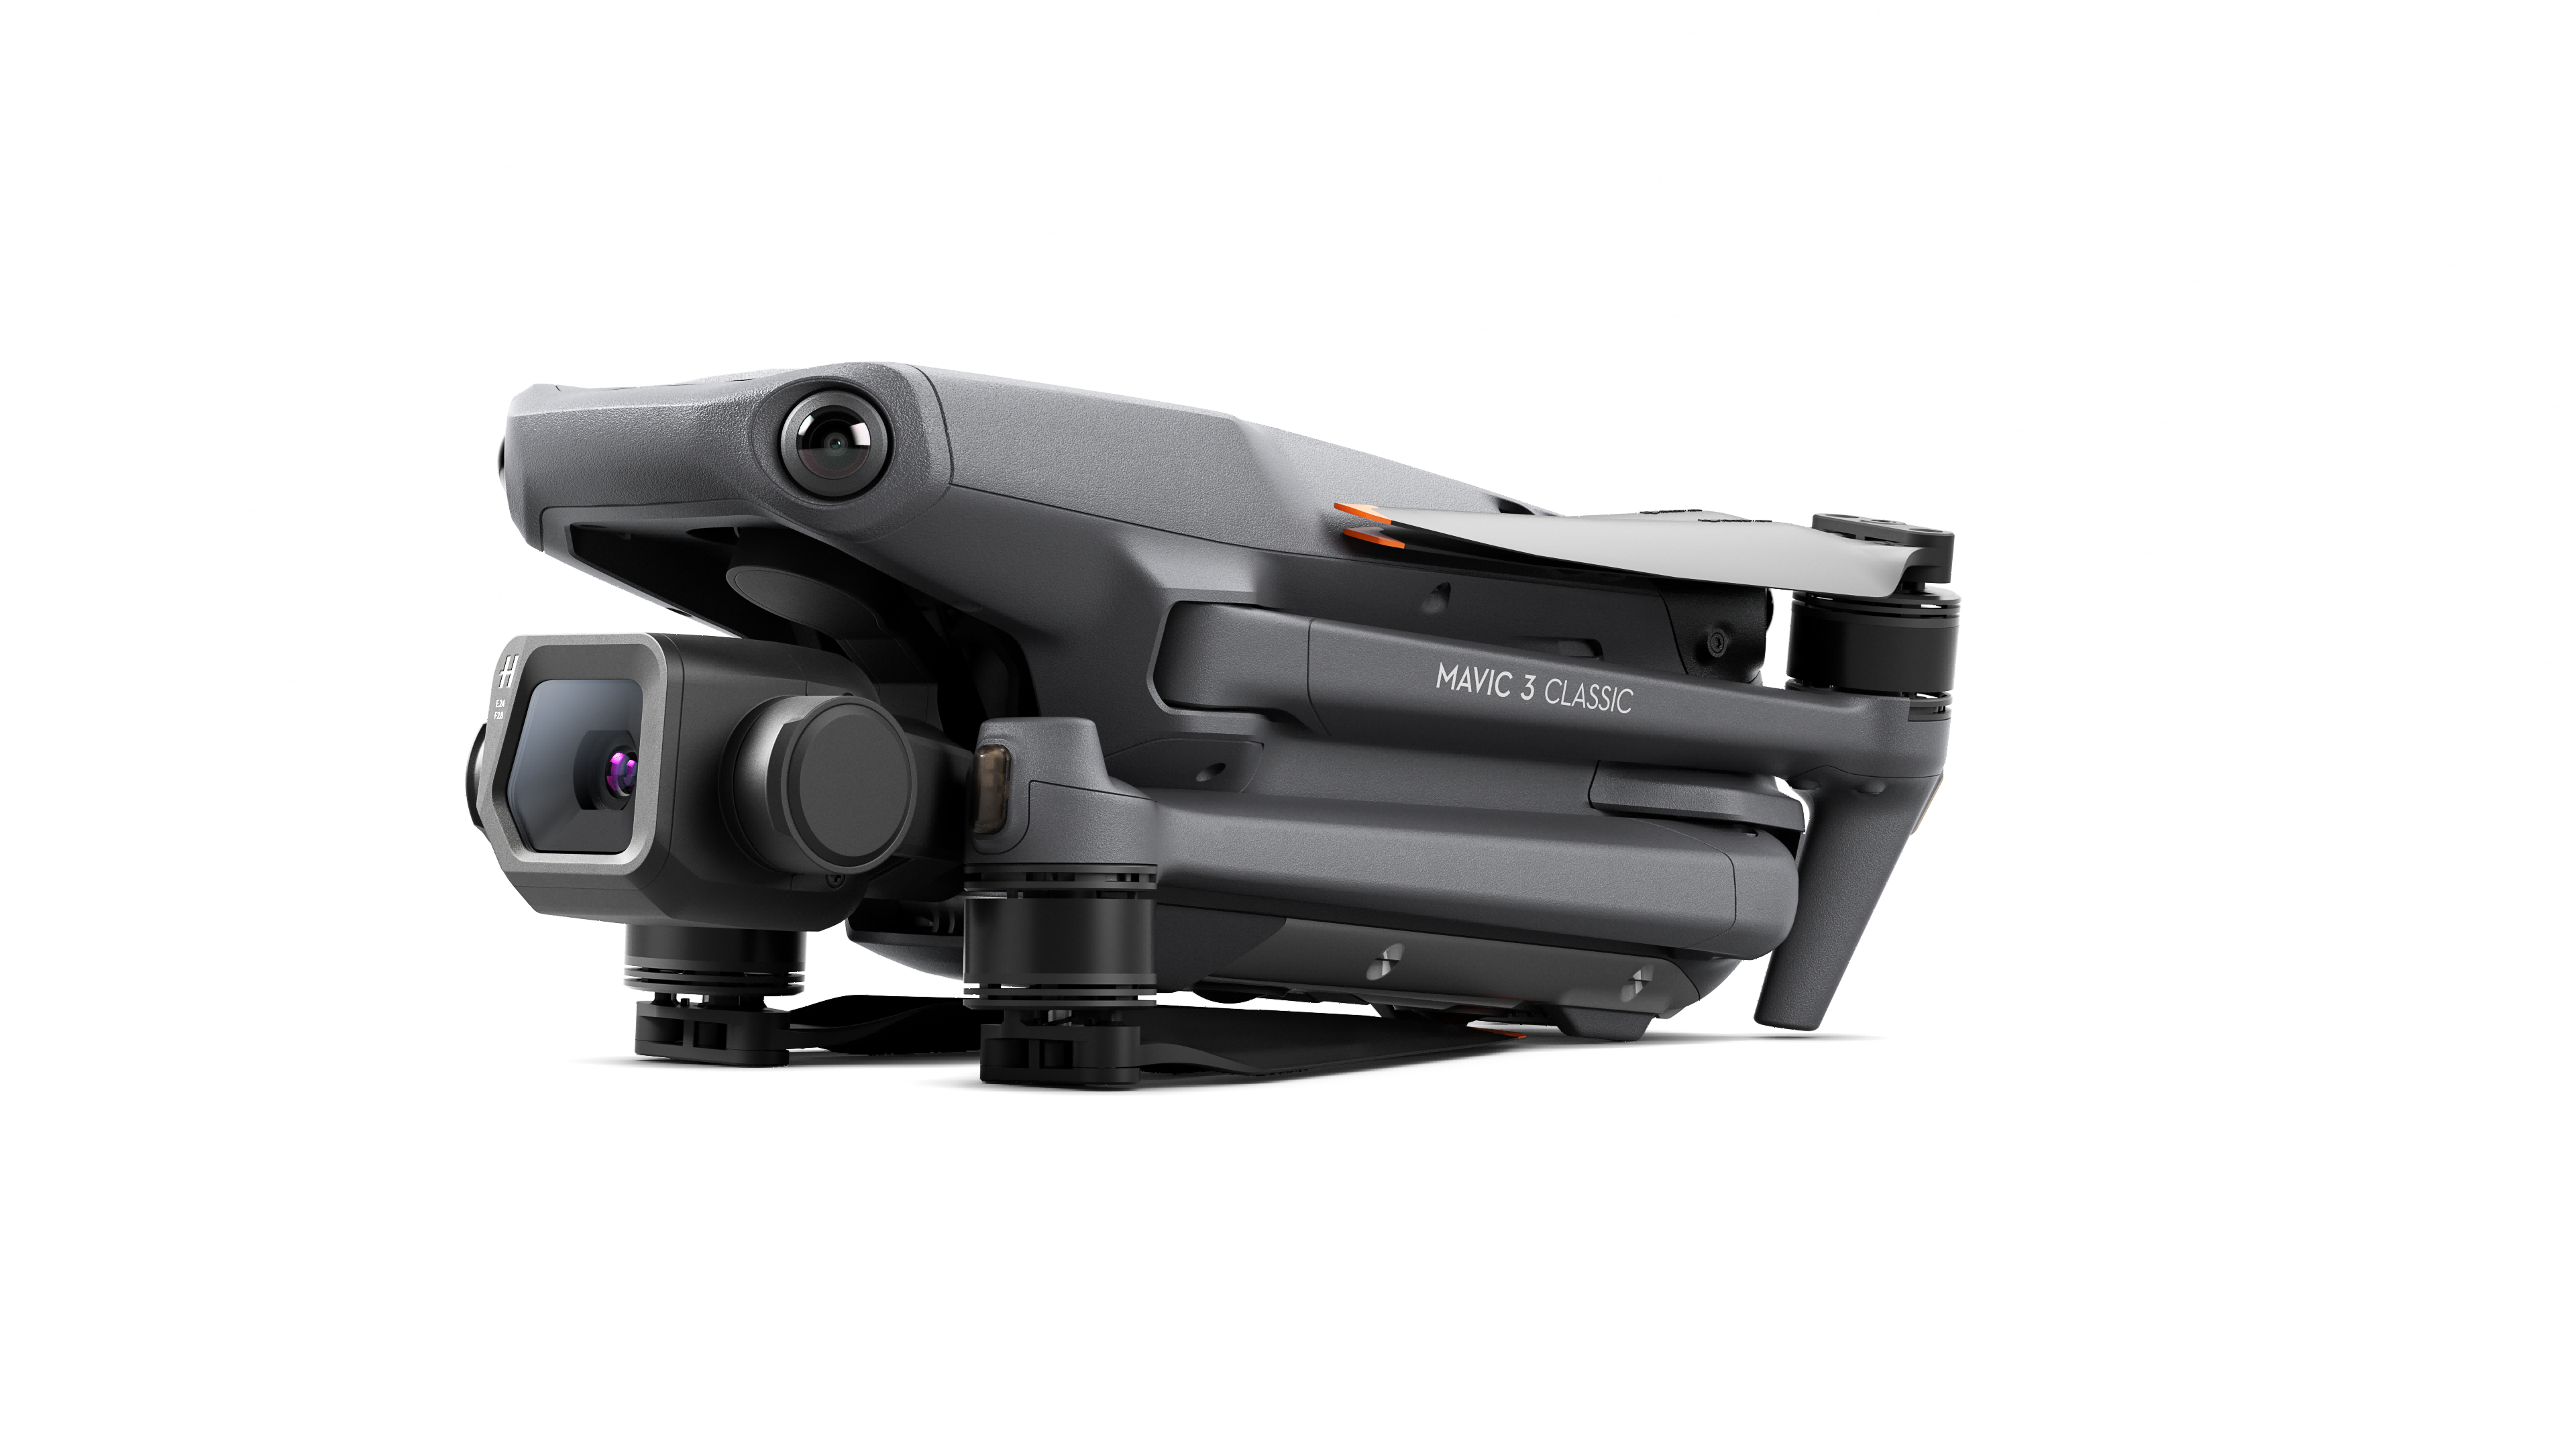 The All-New DJI Mavic 3: Imaging Above Everything